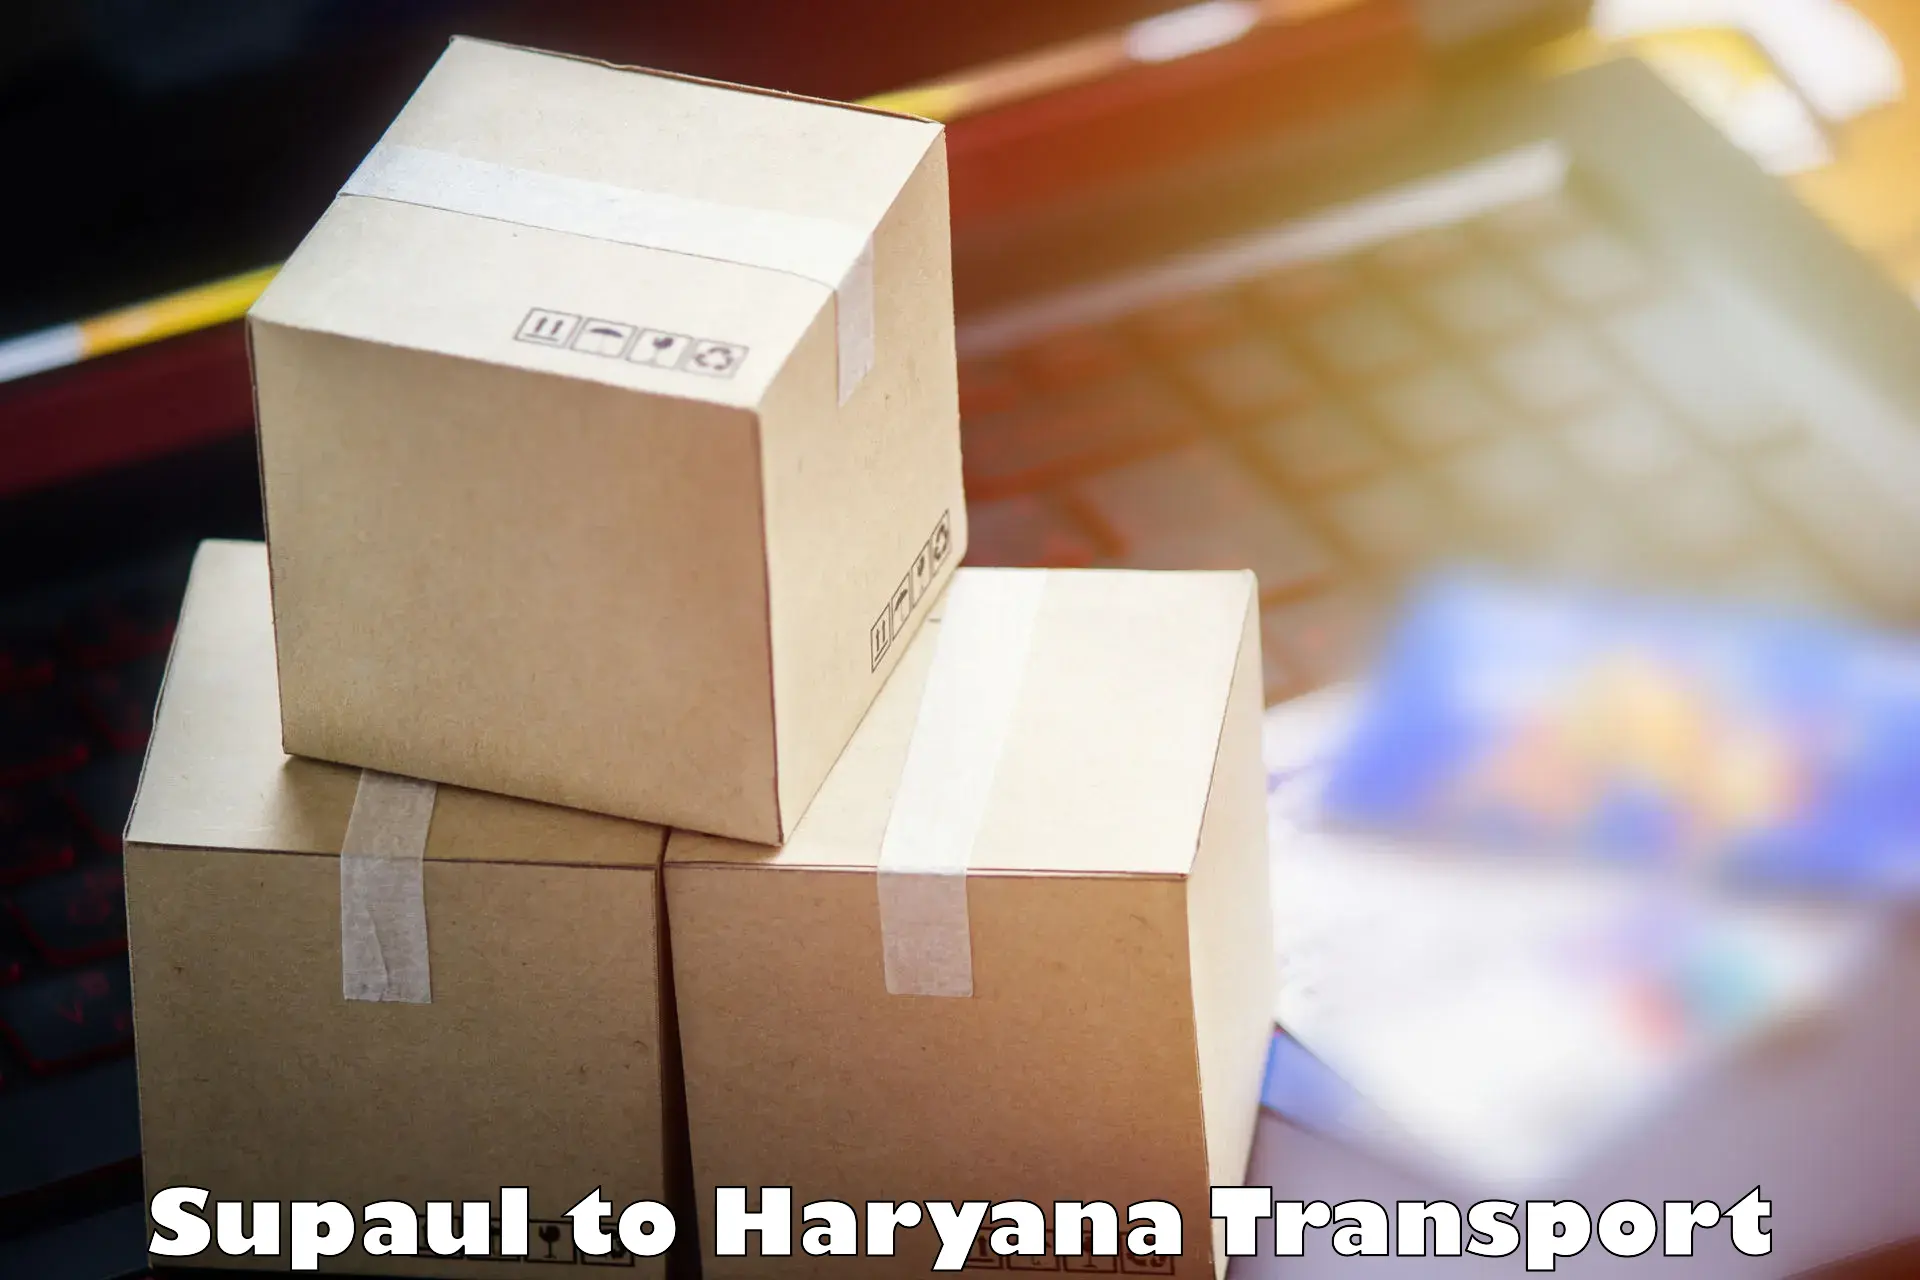 Express transport services in Supaul to Haryana